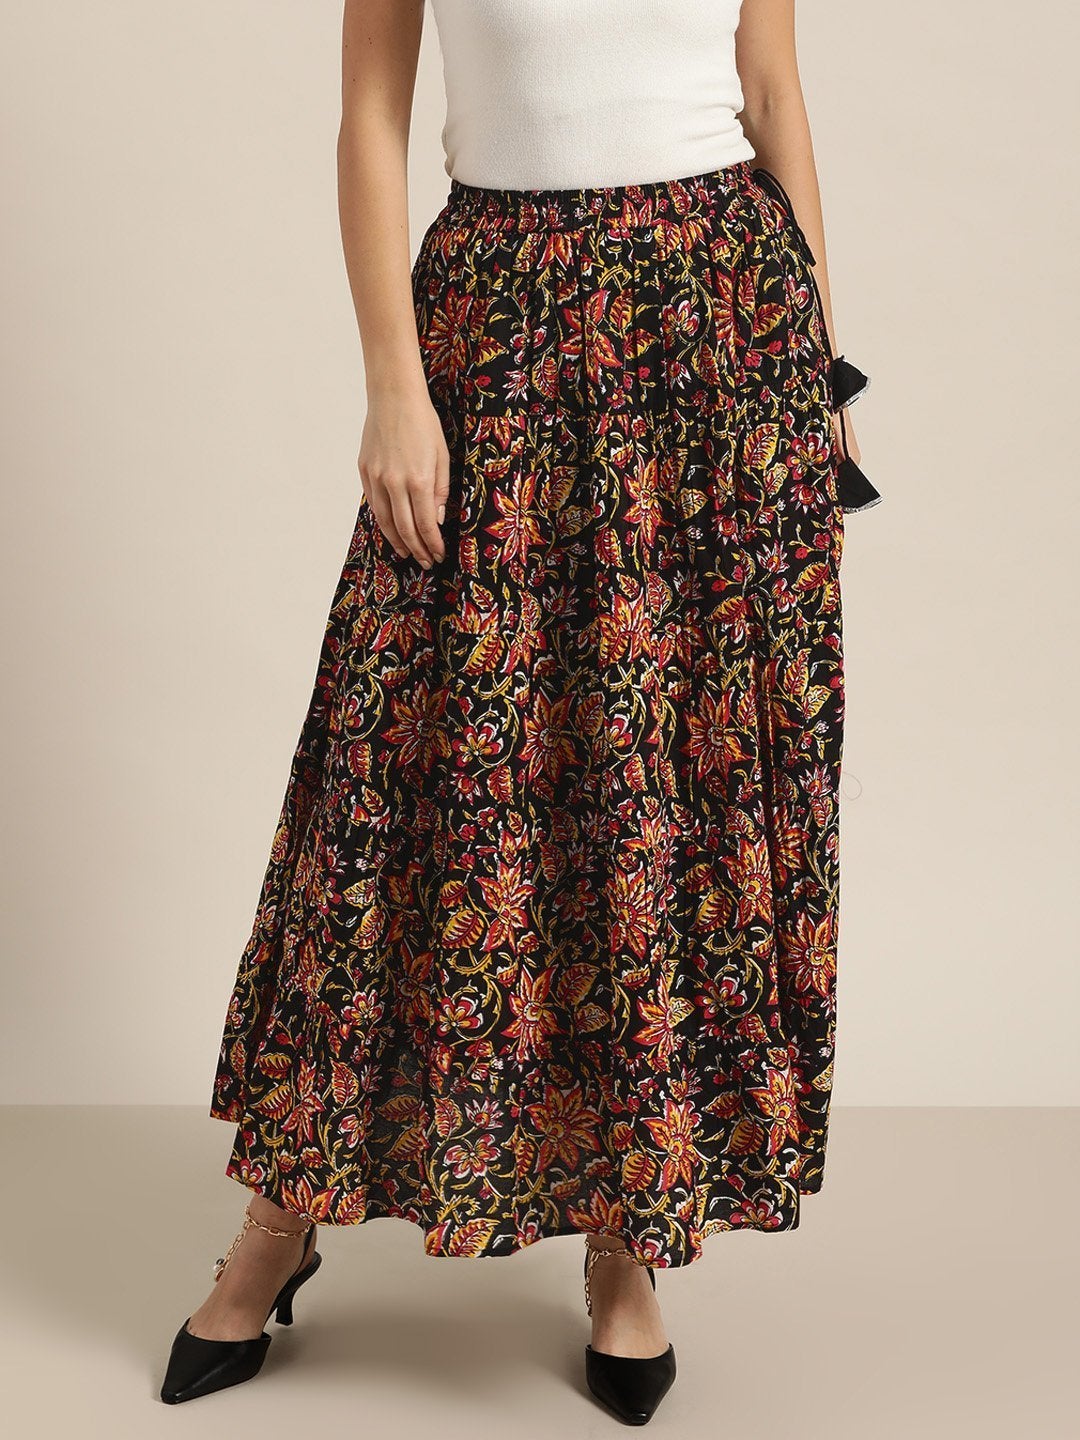 Women's Black Floral Tiered Skirt - SHAE